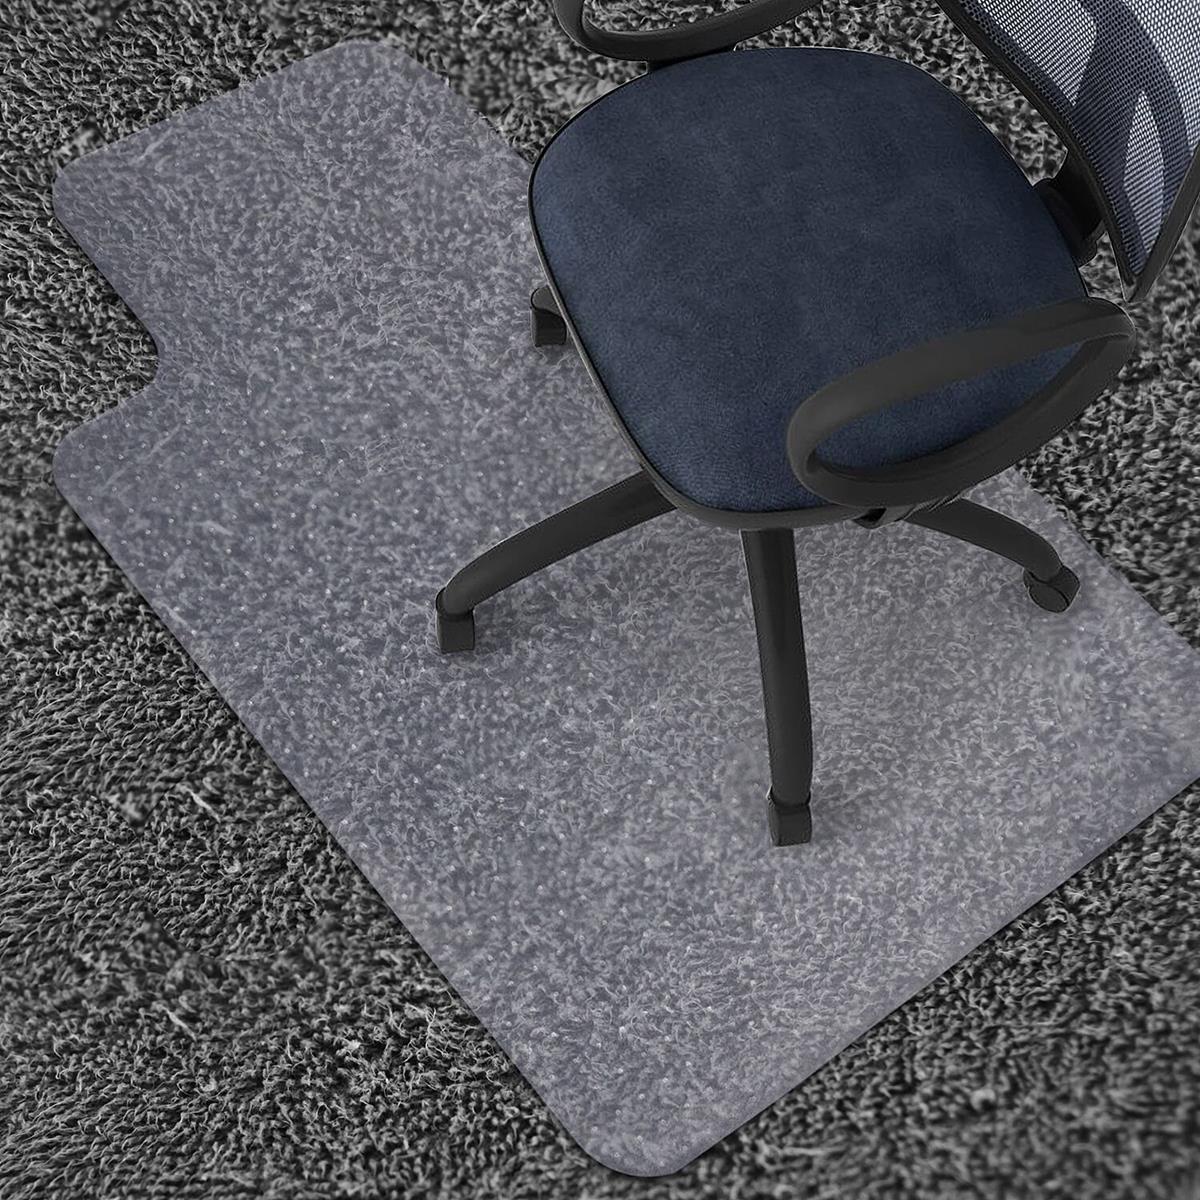 Home Office PVC Chair Mat Pile Carpets Protect Floor Pad